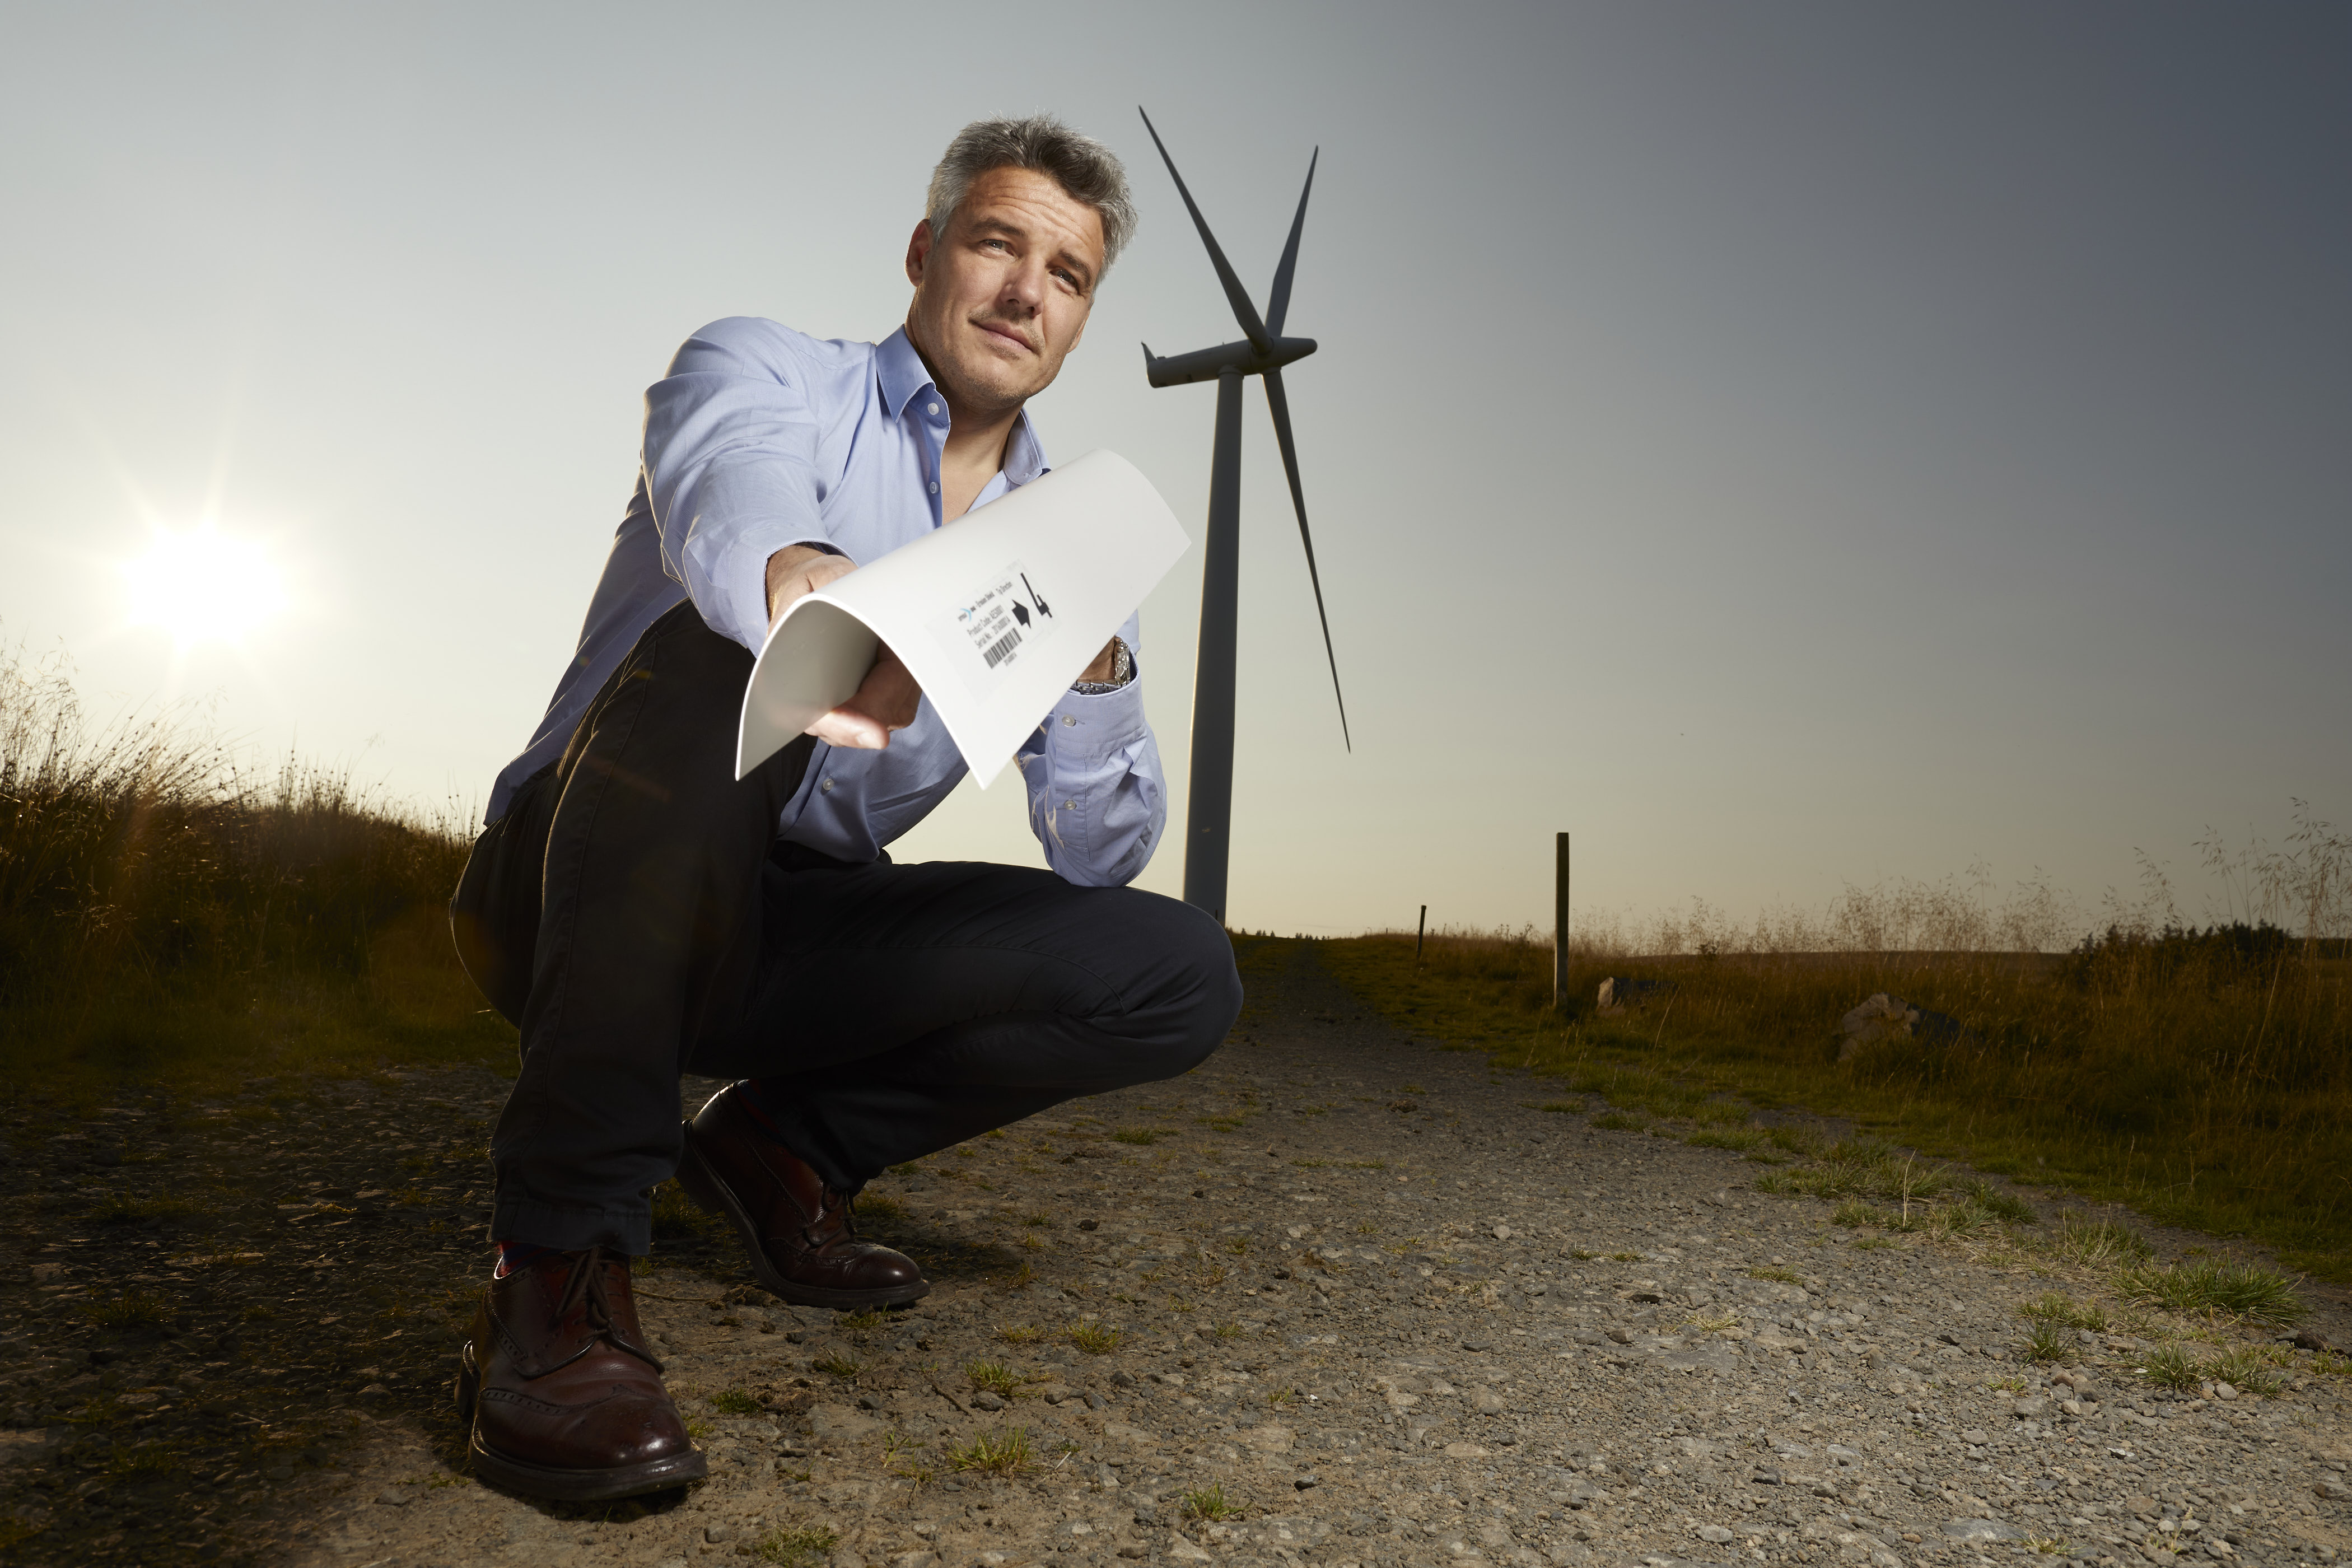 Edge Solutions secures £700,000 funding to transform maintenance of wind farms